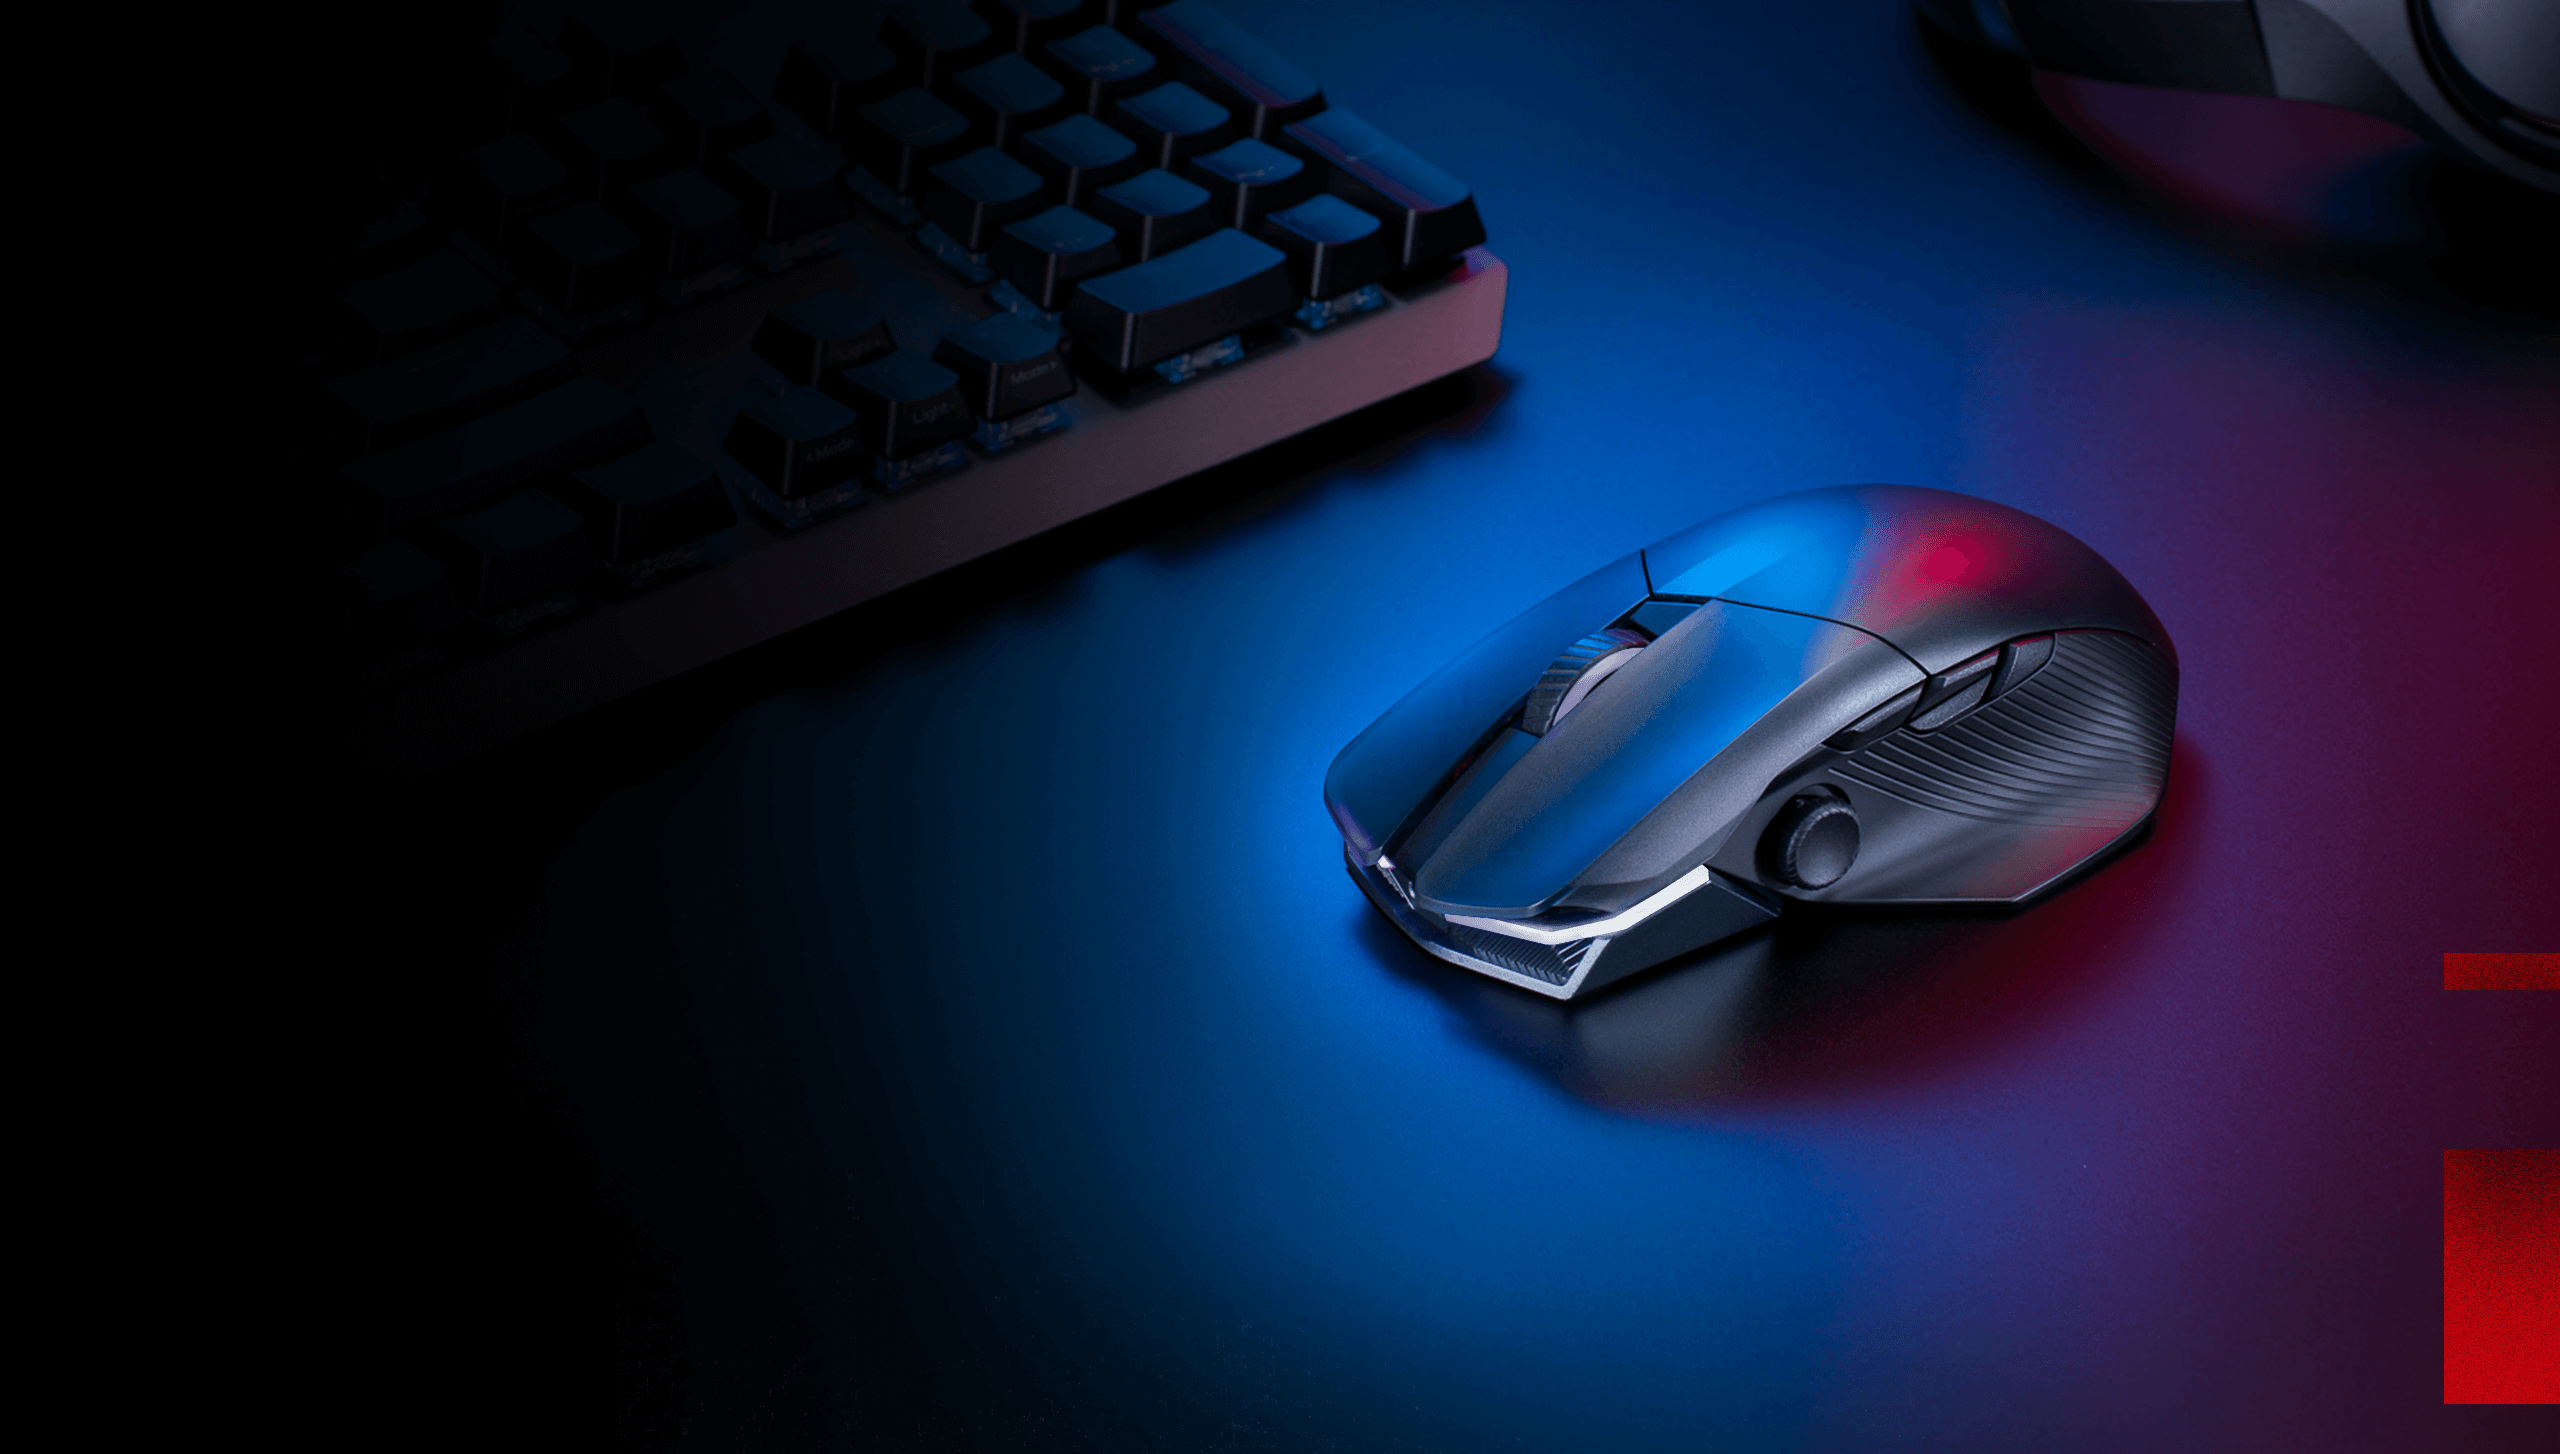 The Chakram X mouse sitting on the table, RGB shining